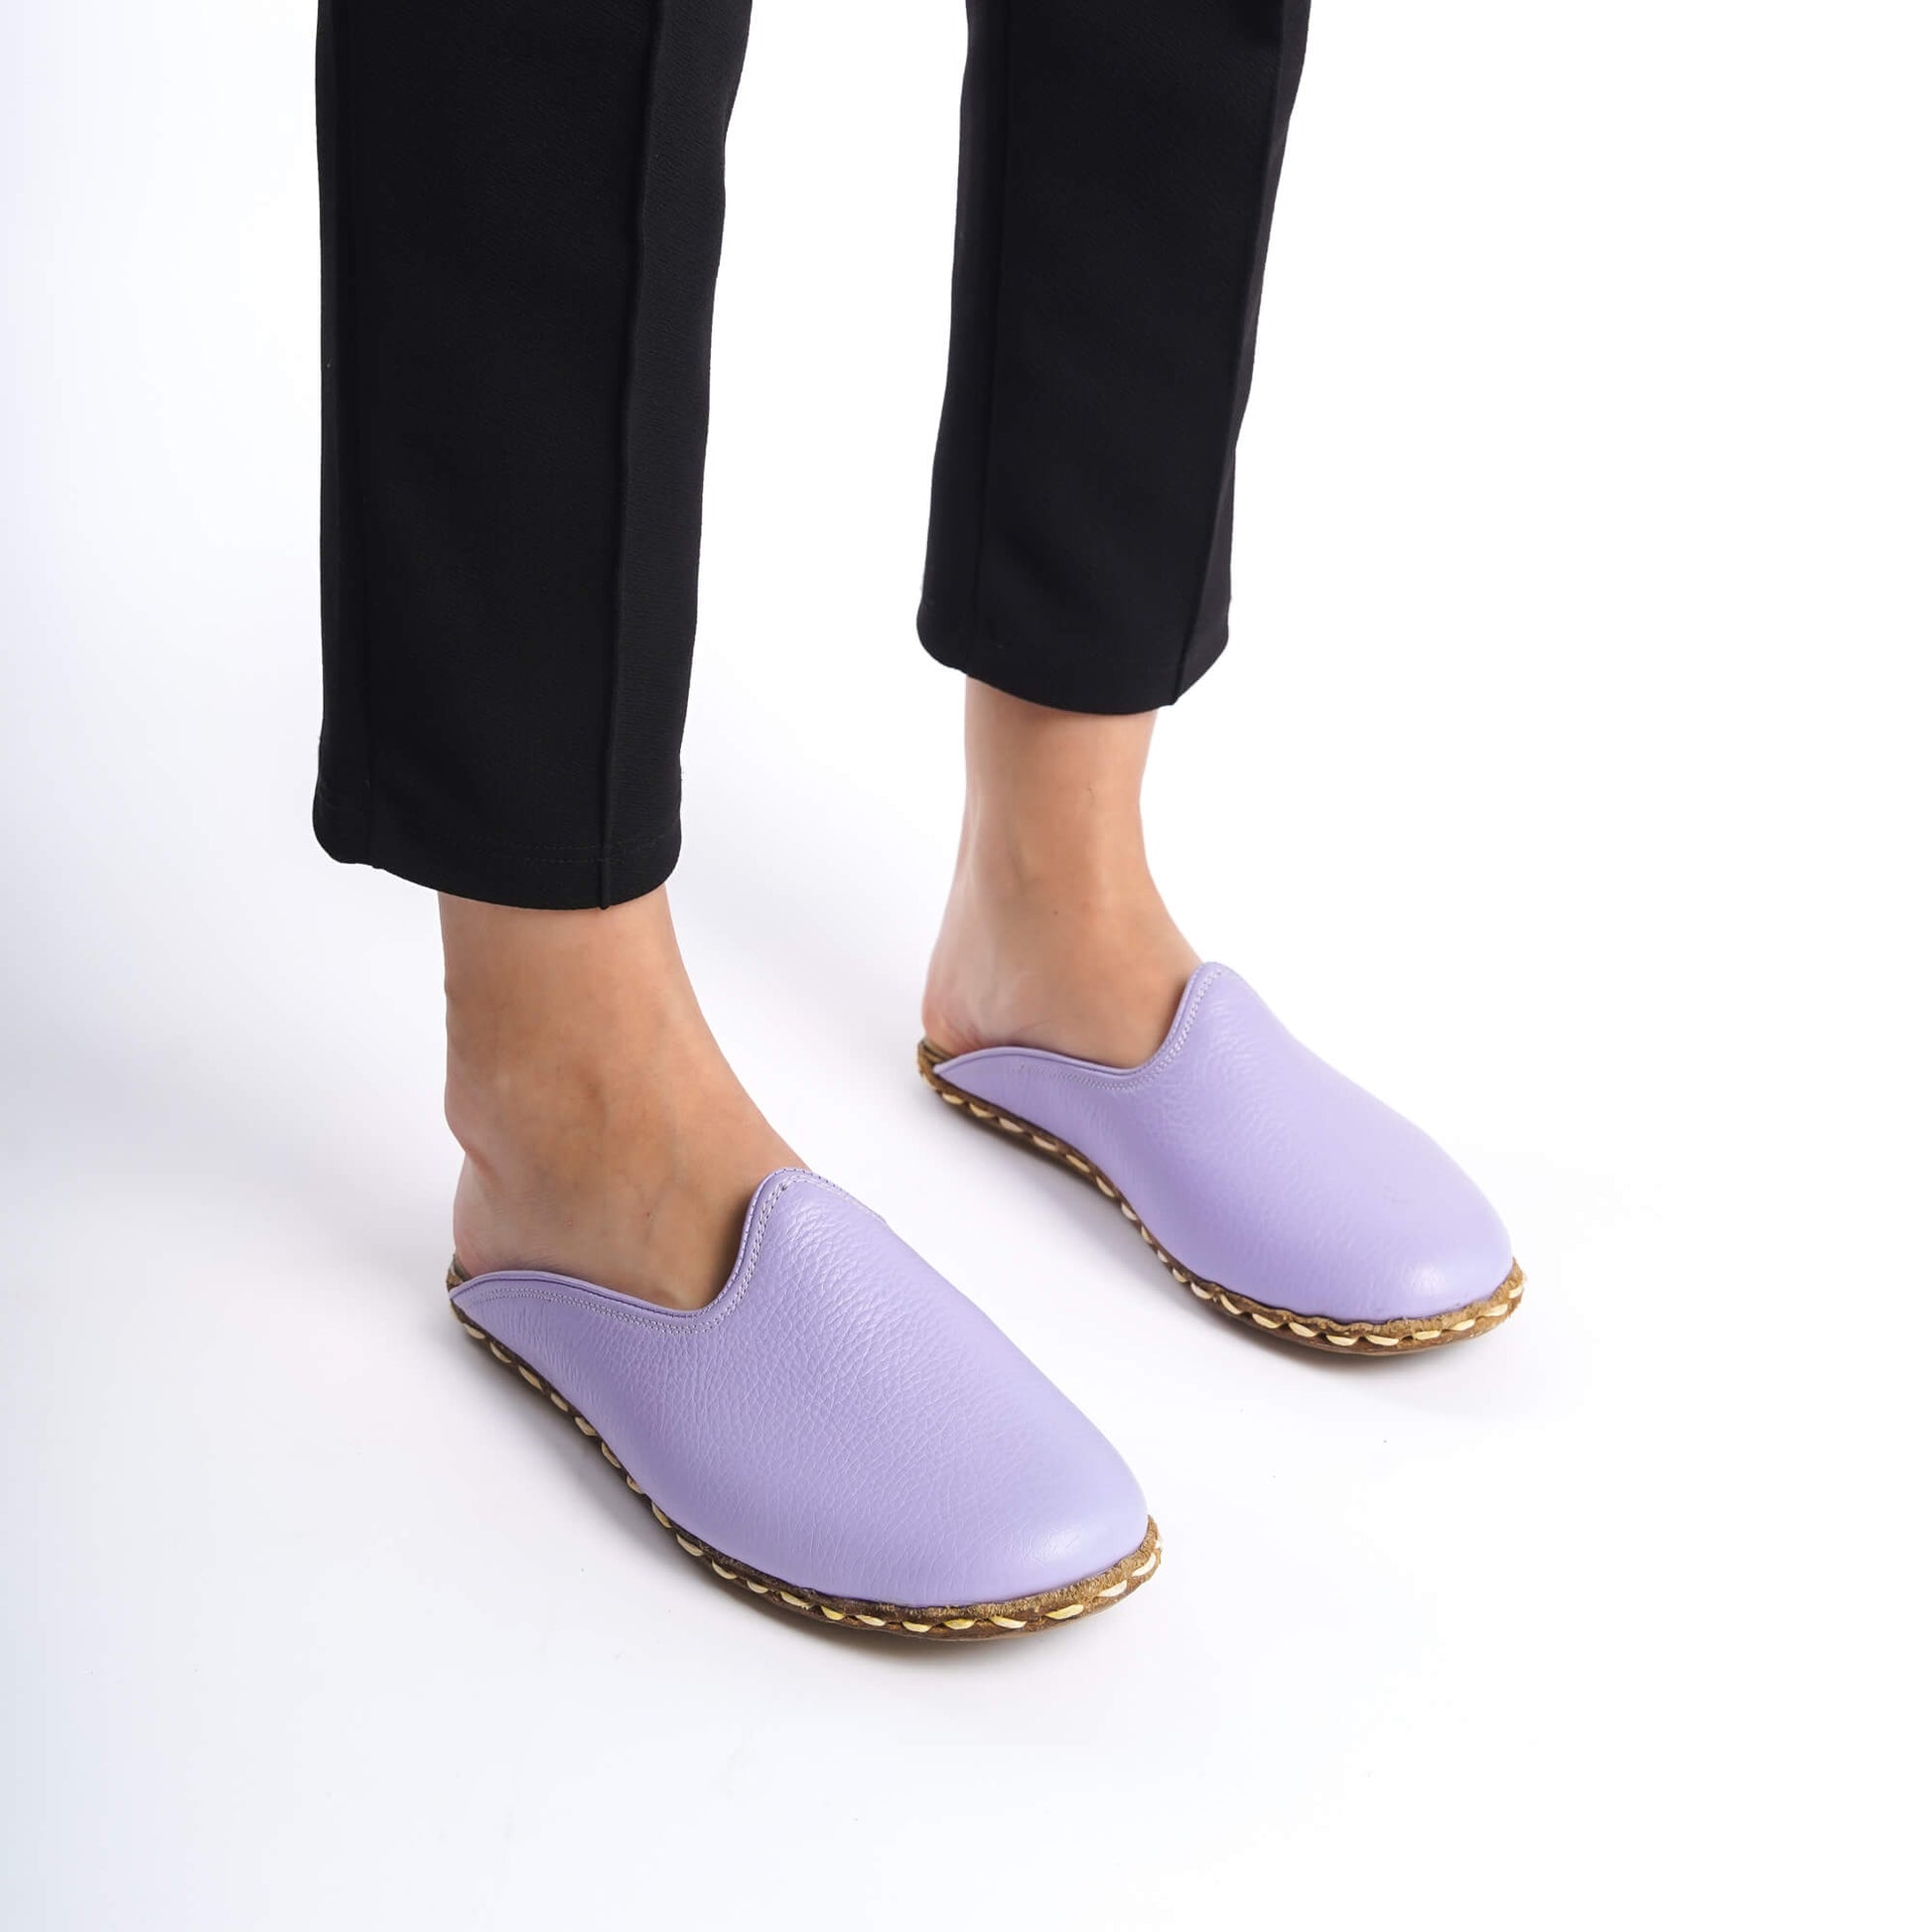 Women's Summer Mules – Lilac Leather, Stitched Real Leather Sole